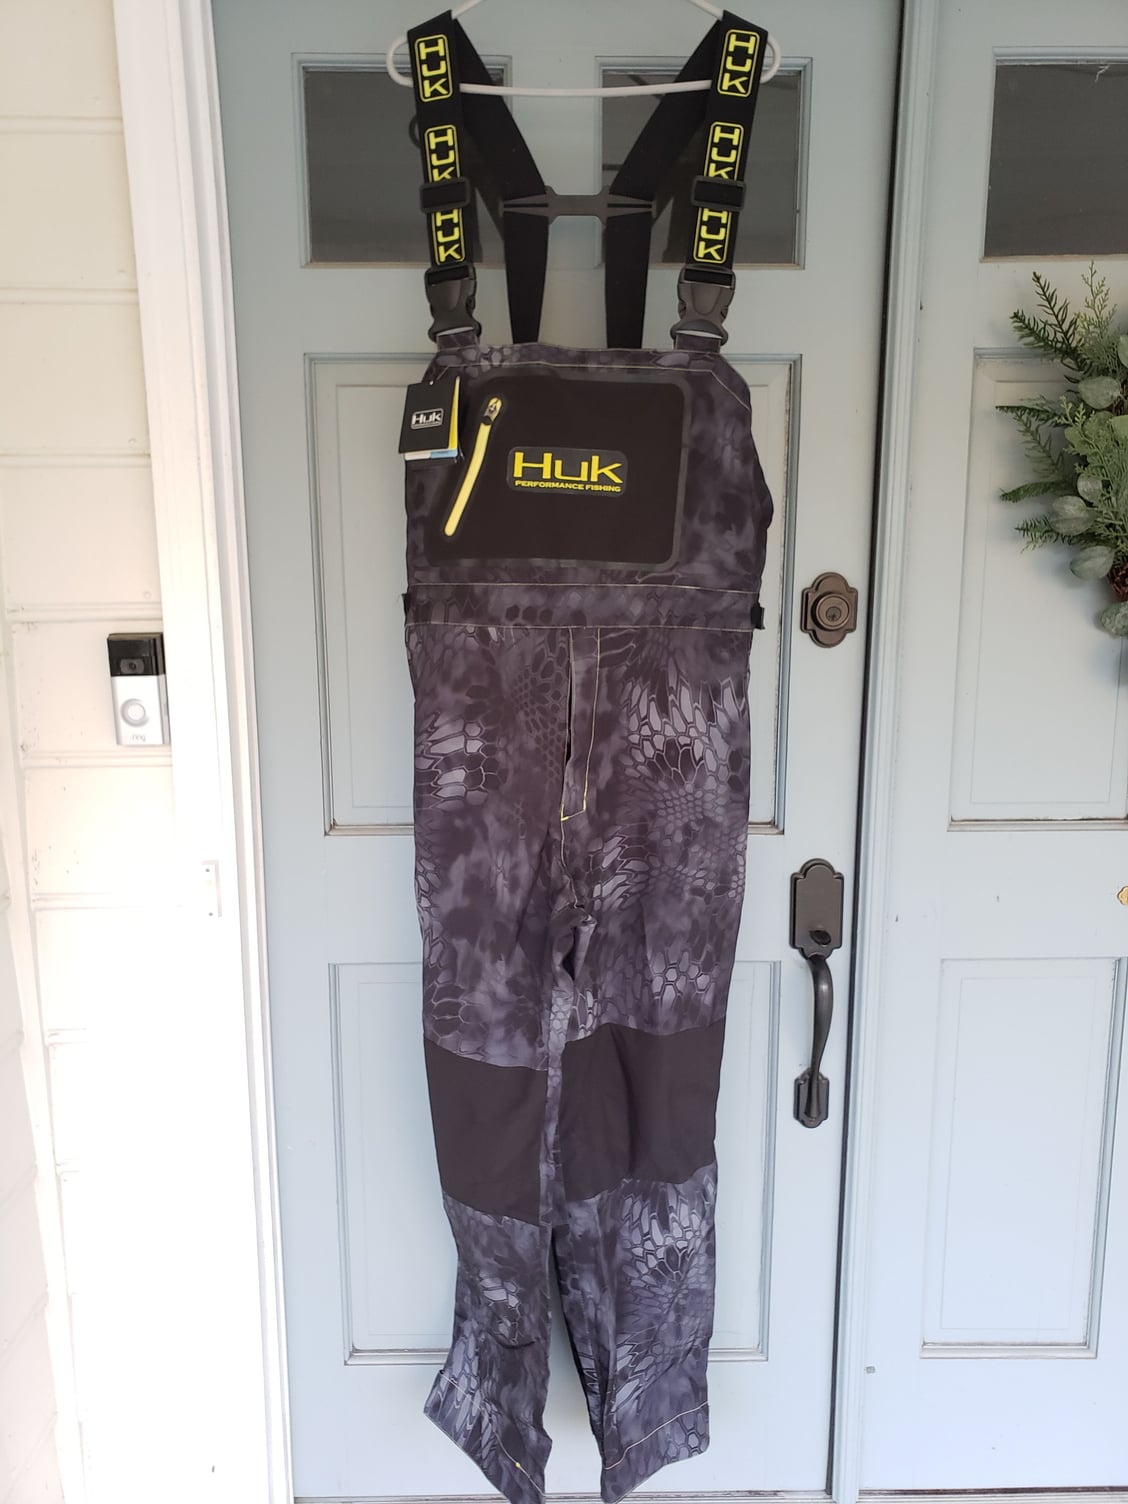 Huk Foul Weather Bibs - The Hull Truth - Boating and Fishing Forum